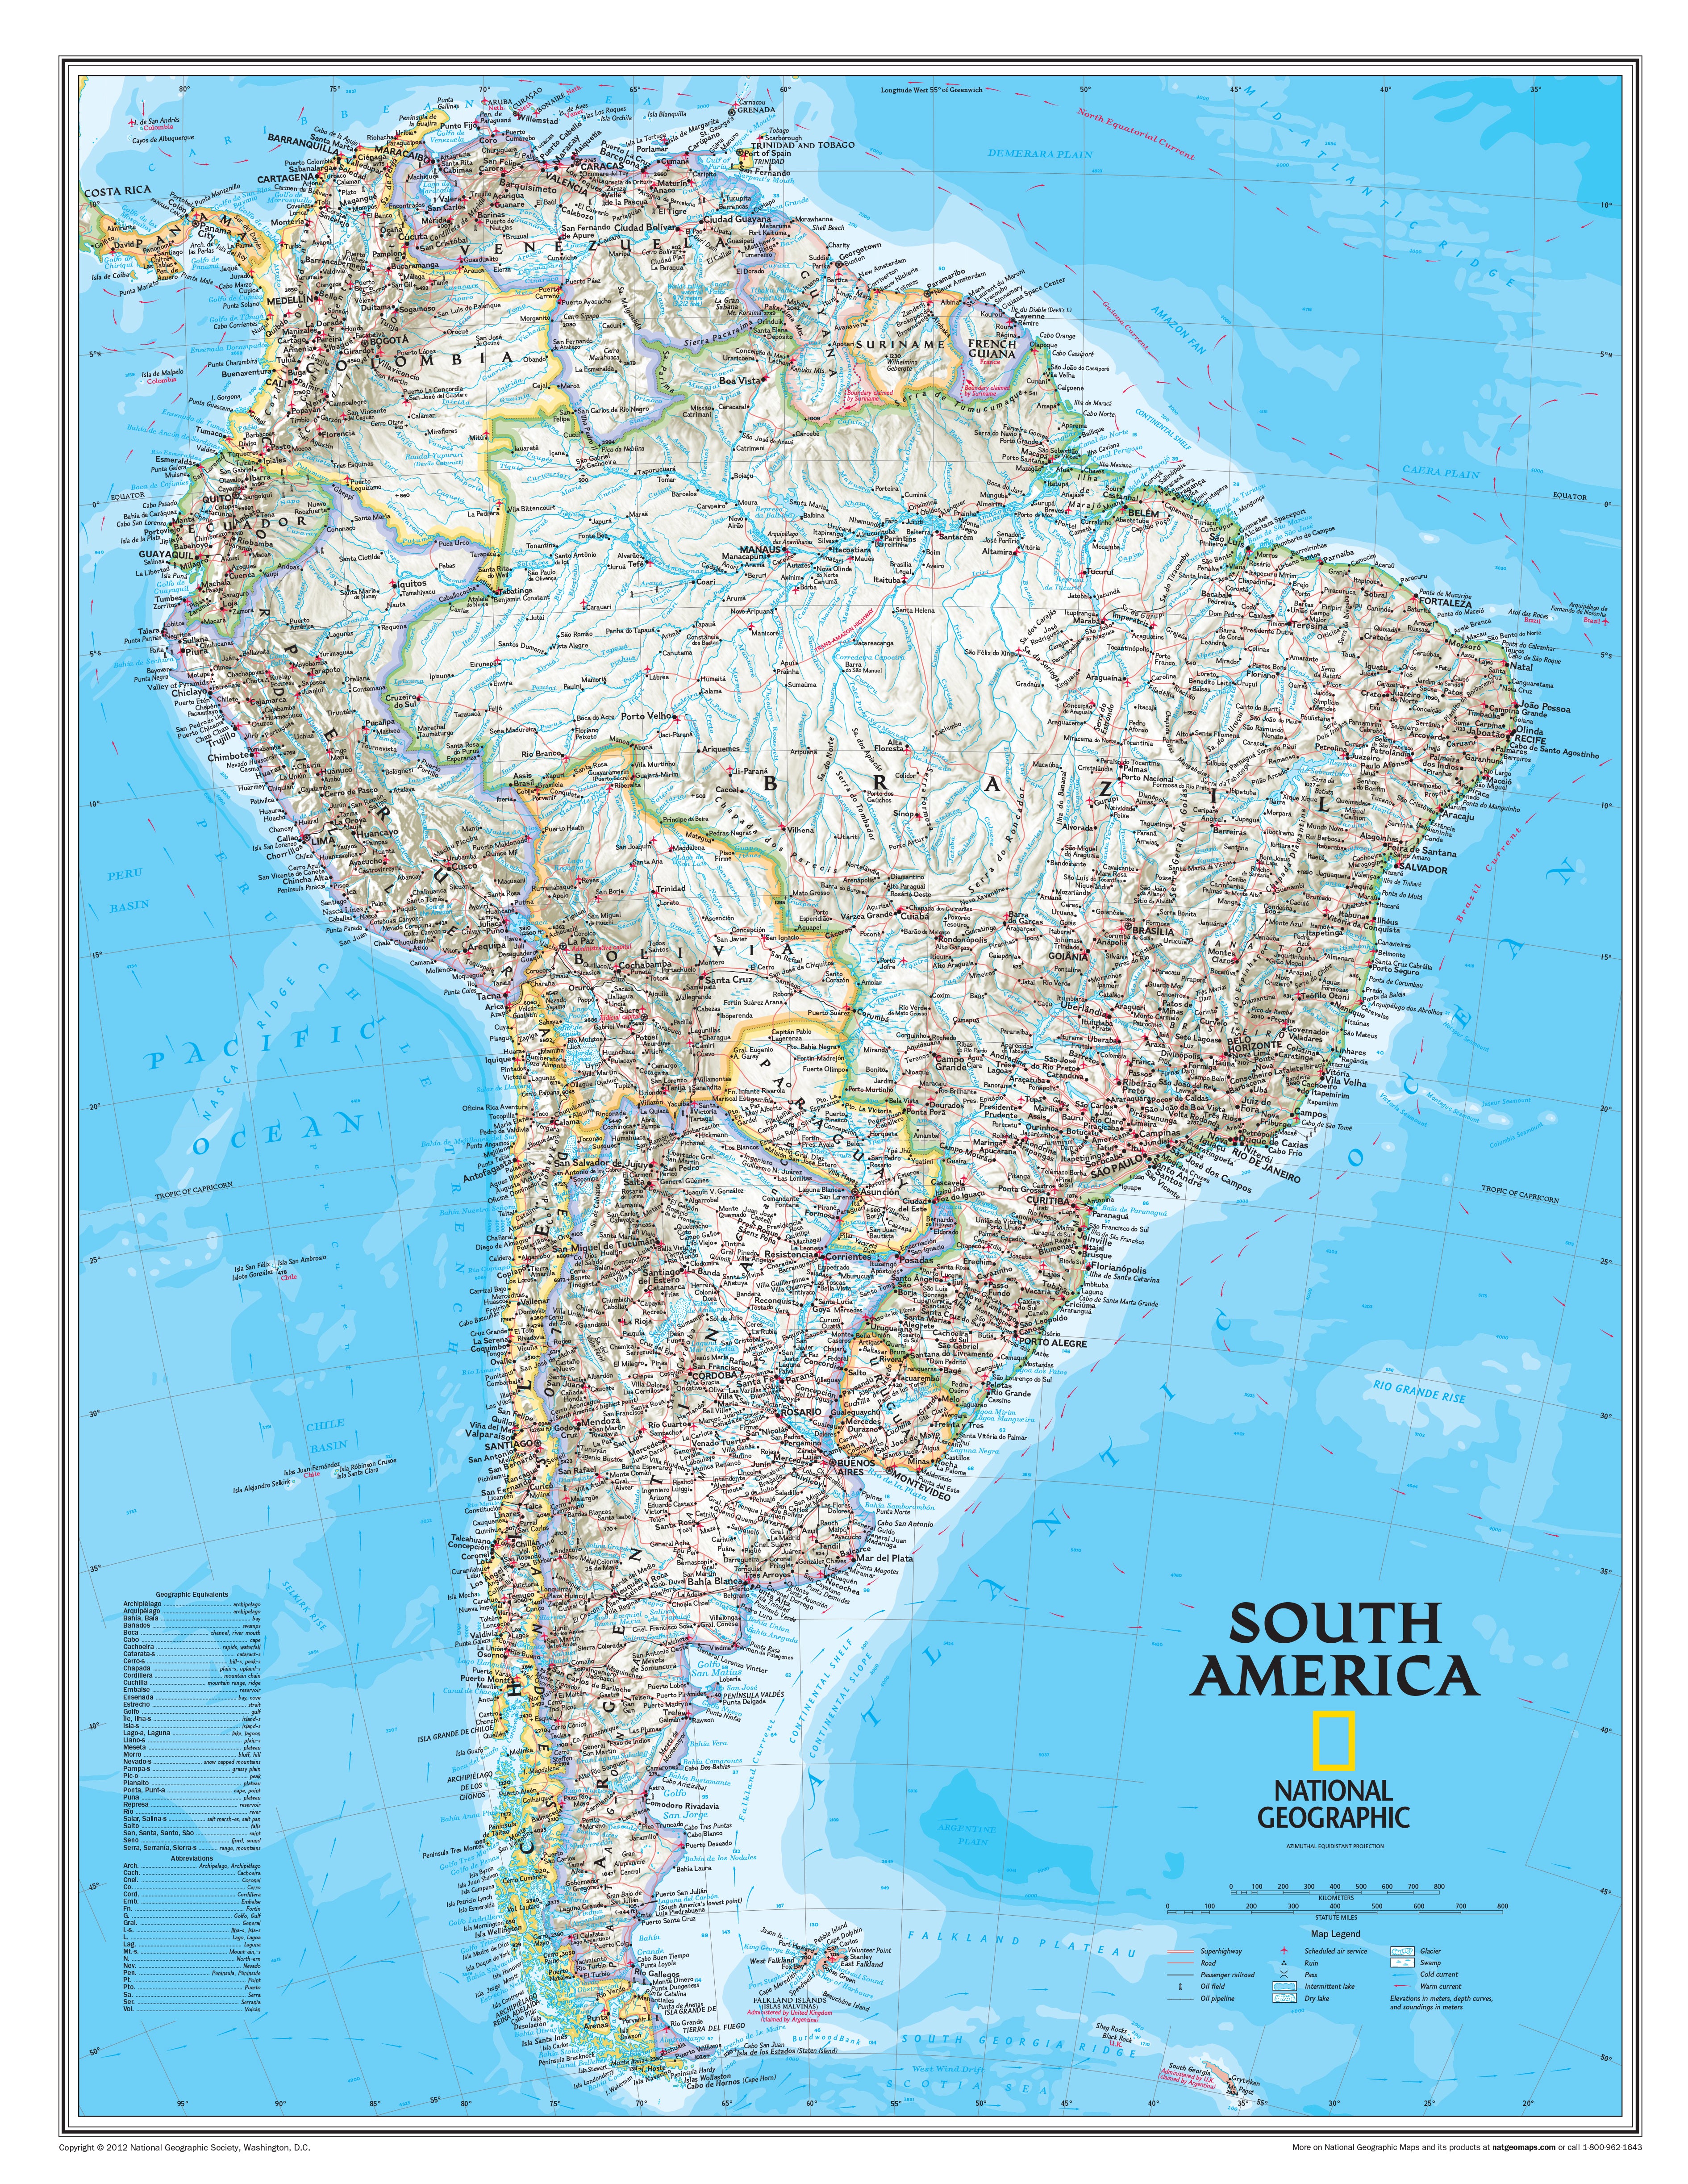 South America  a part of National Geographic Political 7 Continent Maps Classroom Pull Down 7 Map Bundle